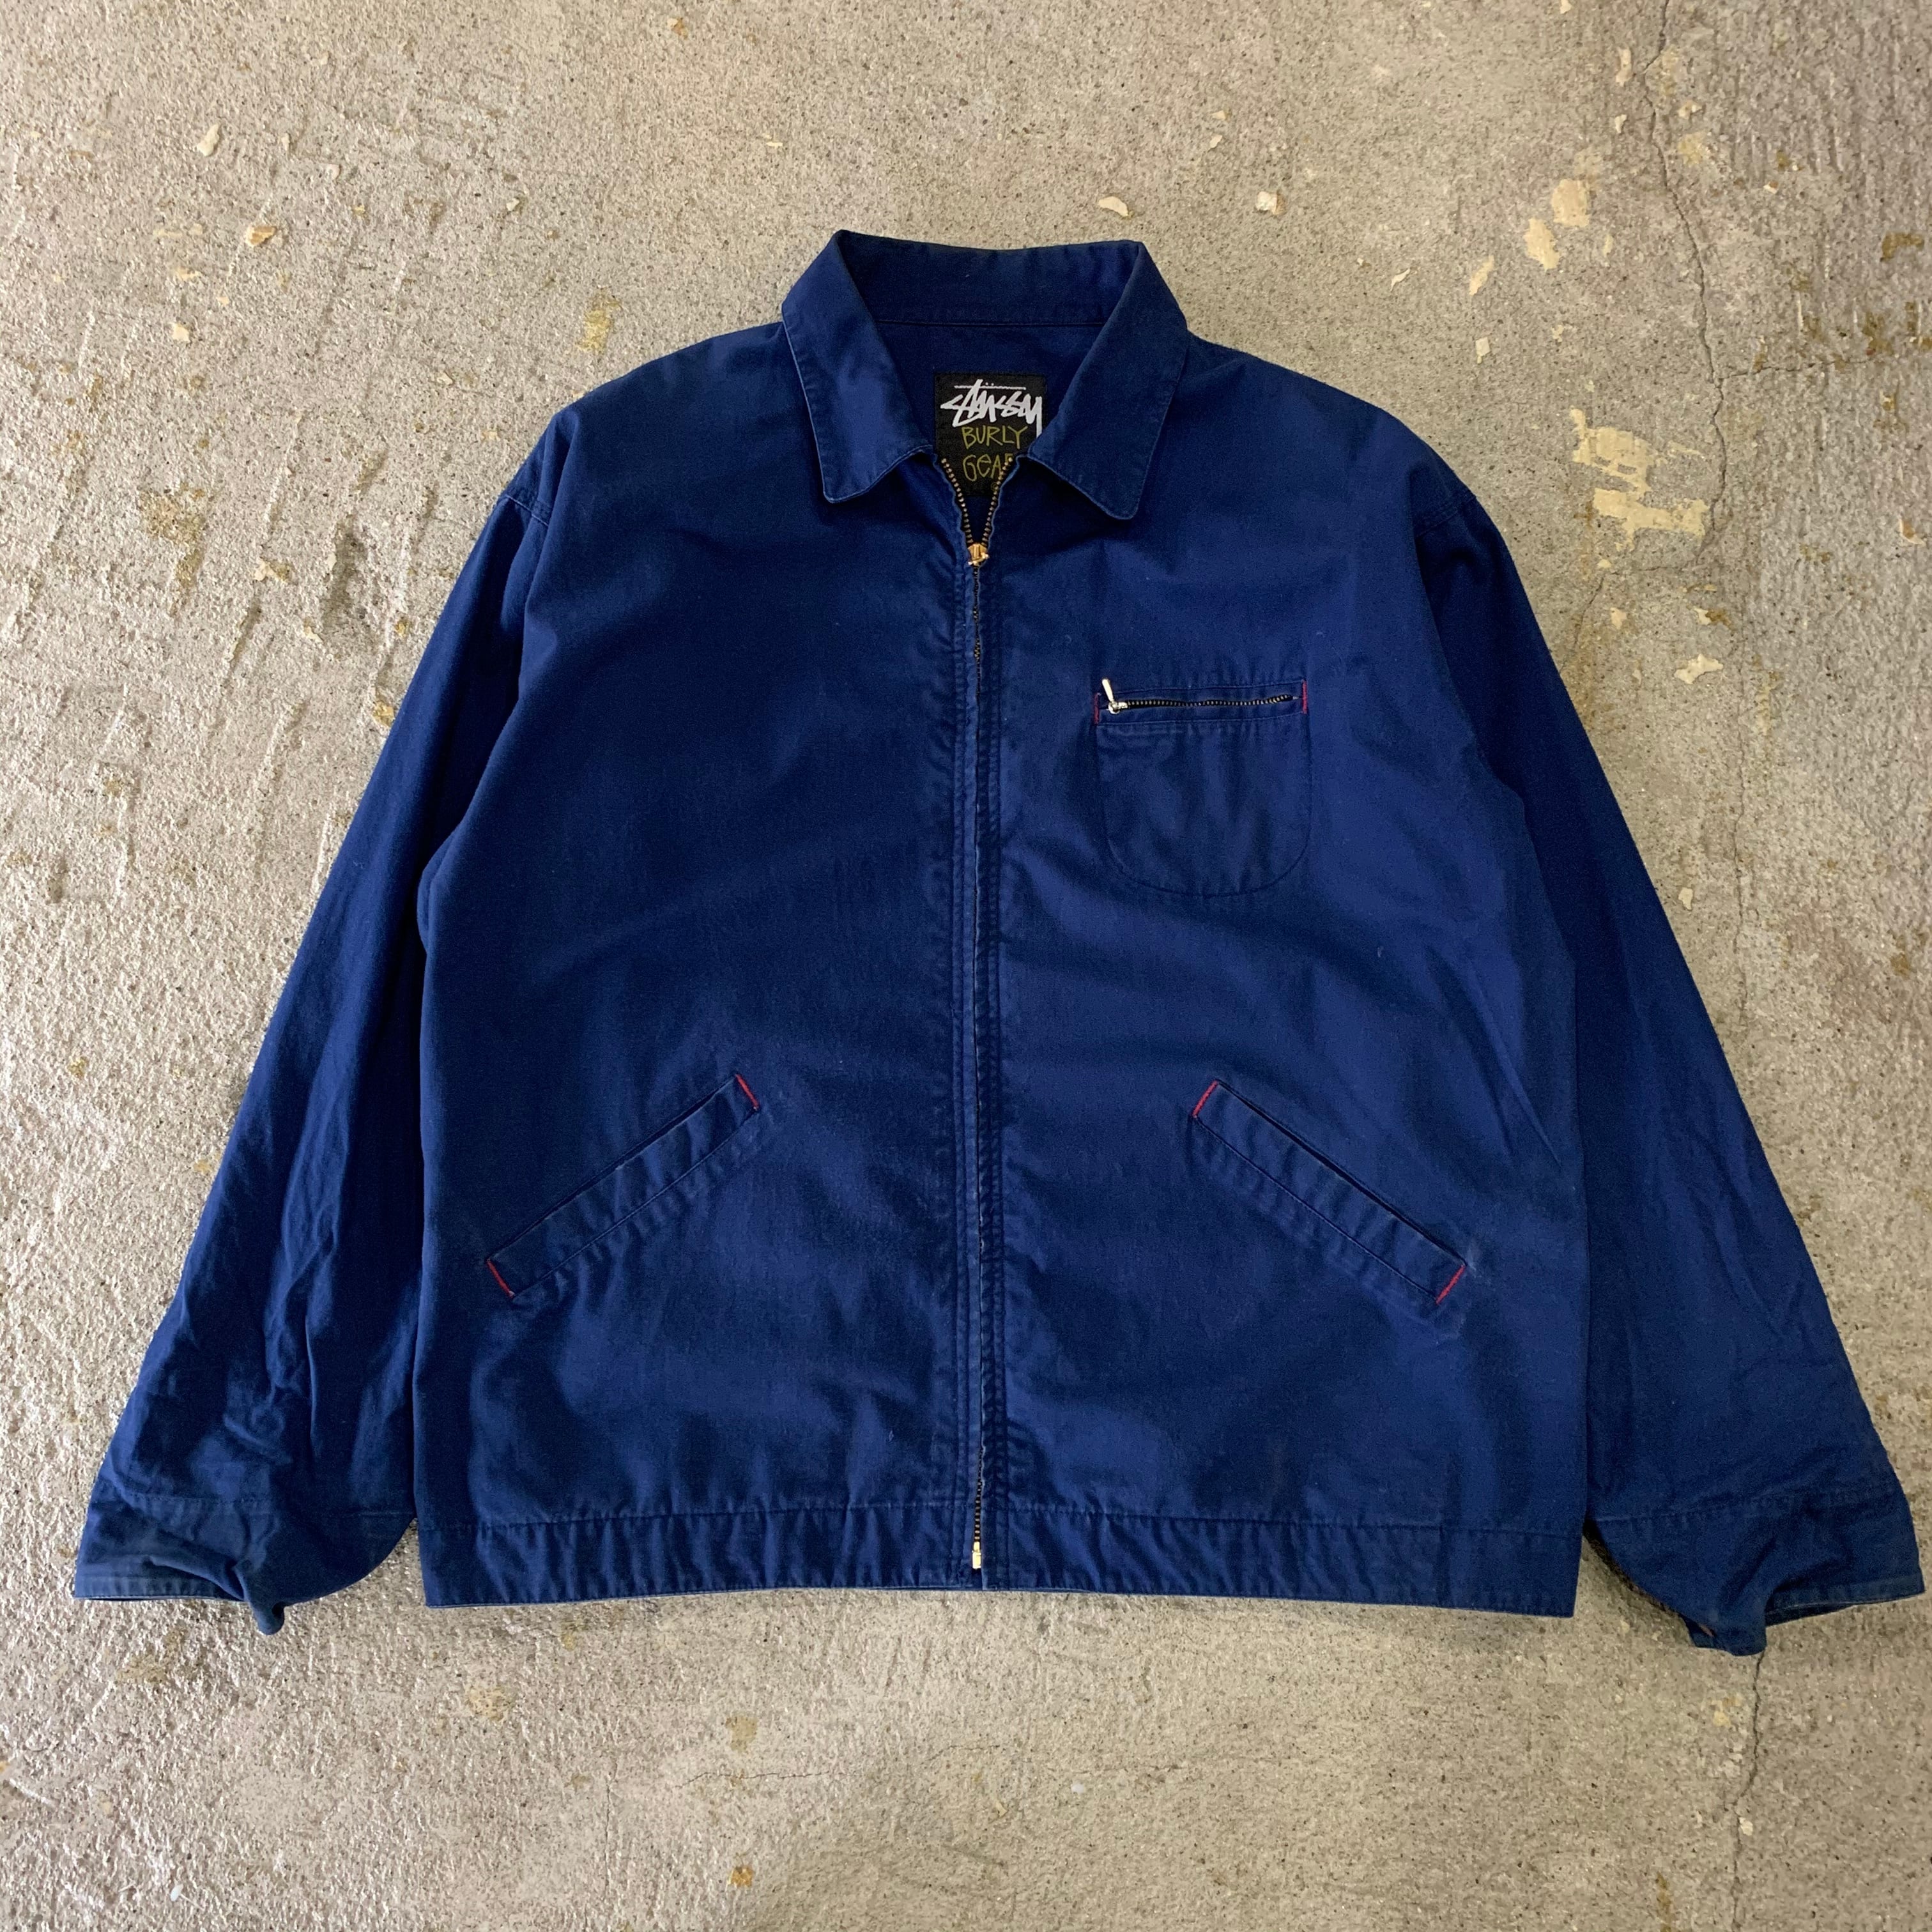 90s old stussy zip up jaket | What'z up